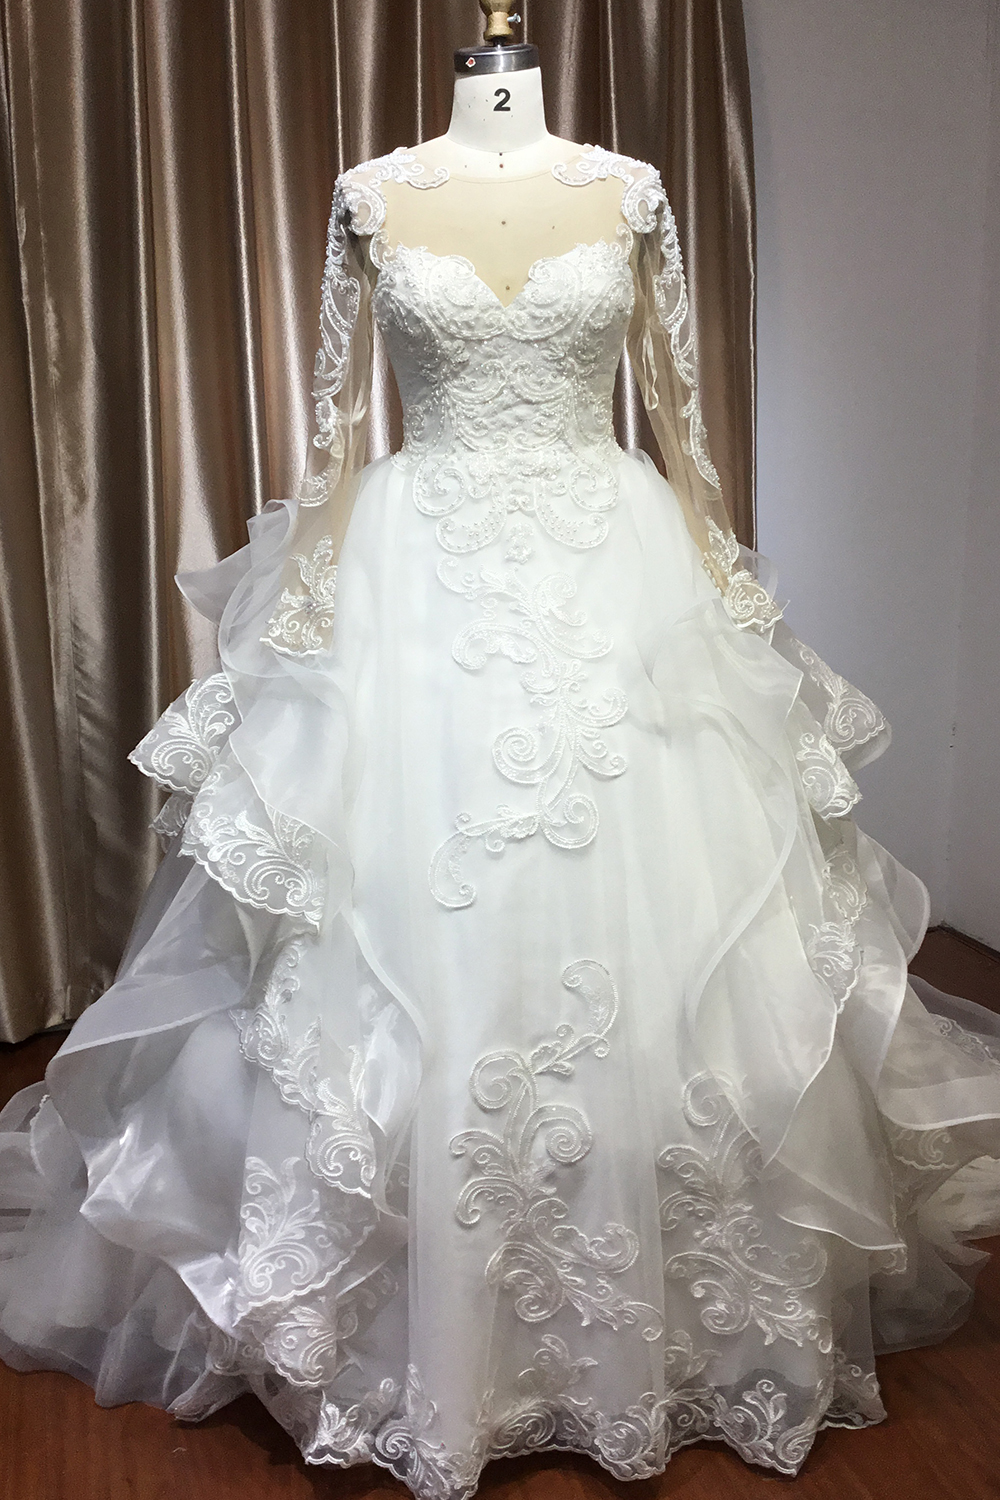 Long Sleeve Ruffles Ball Gown Wedding Dress With Lace Appliques - lulusllly